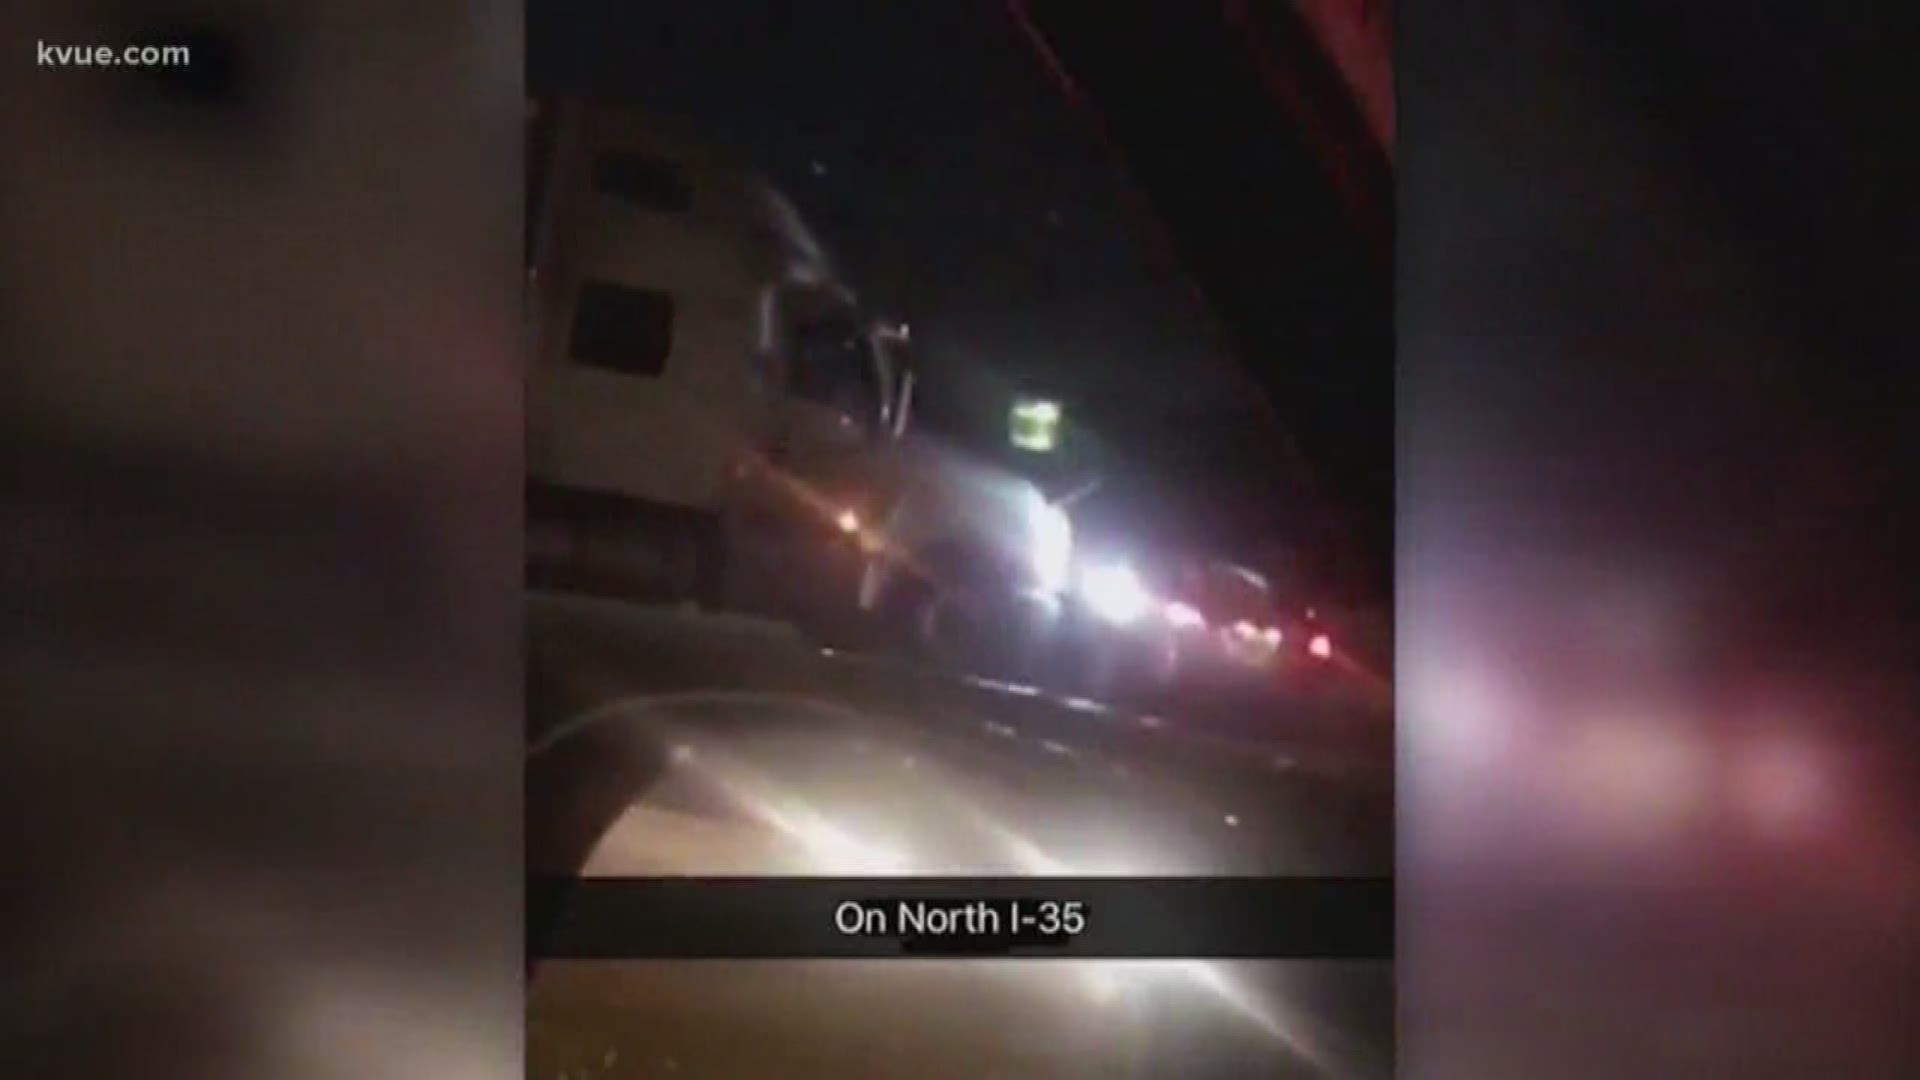 KVUE obtained shocking video from a viewer that shows an 18-wheeler pushing another vehicle along Interstate 35 after a crash.